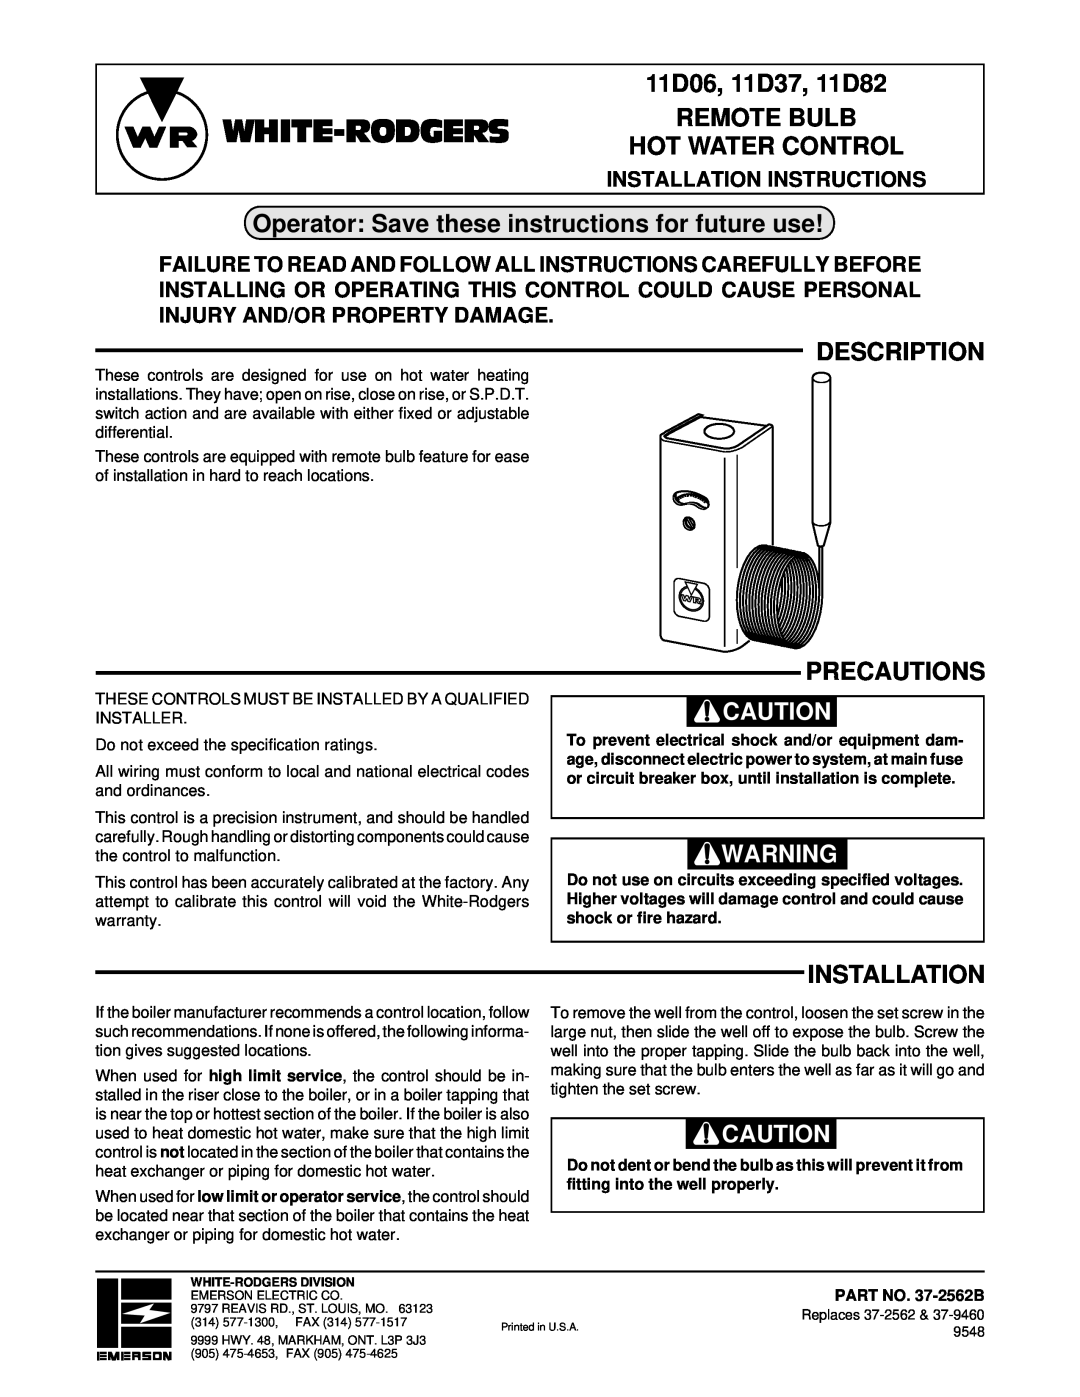 White Rodgers installation instructions White-Rodgers, 11D06, 11D37, 11D82 REMOTE BULB HOT WATER CONTROL, Description 